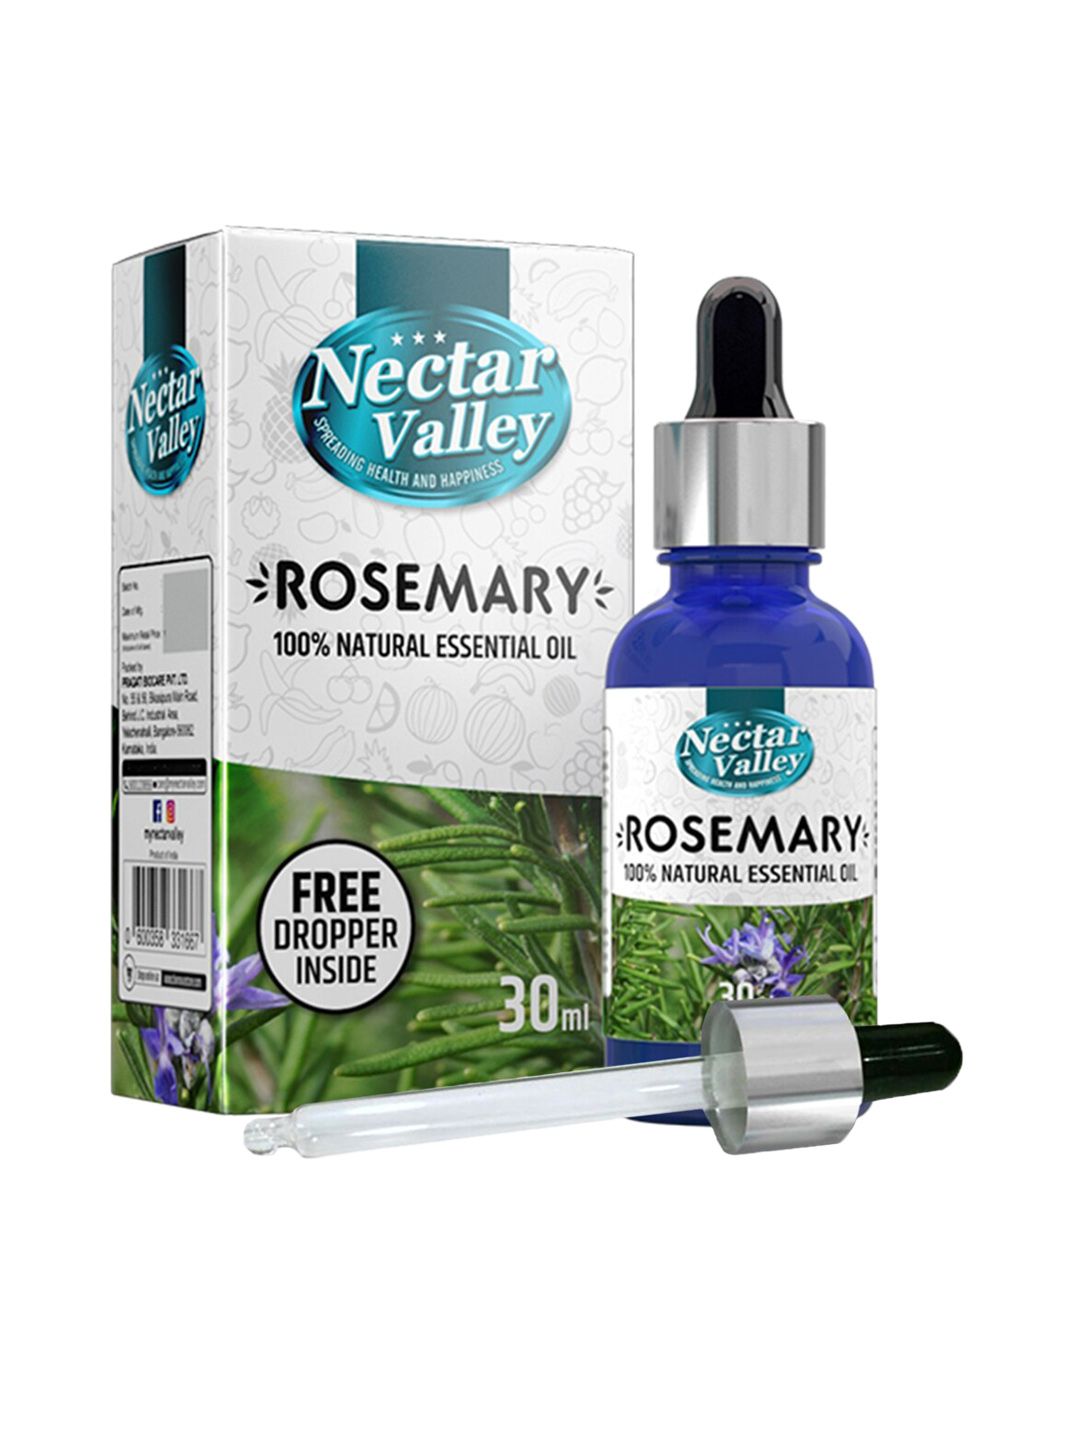 Nectar Valley Rosemary Essential Oil For Scent/Diffuser 30ml Price in India